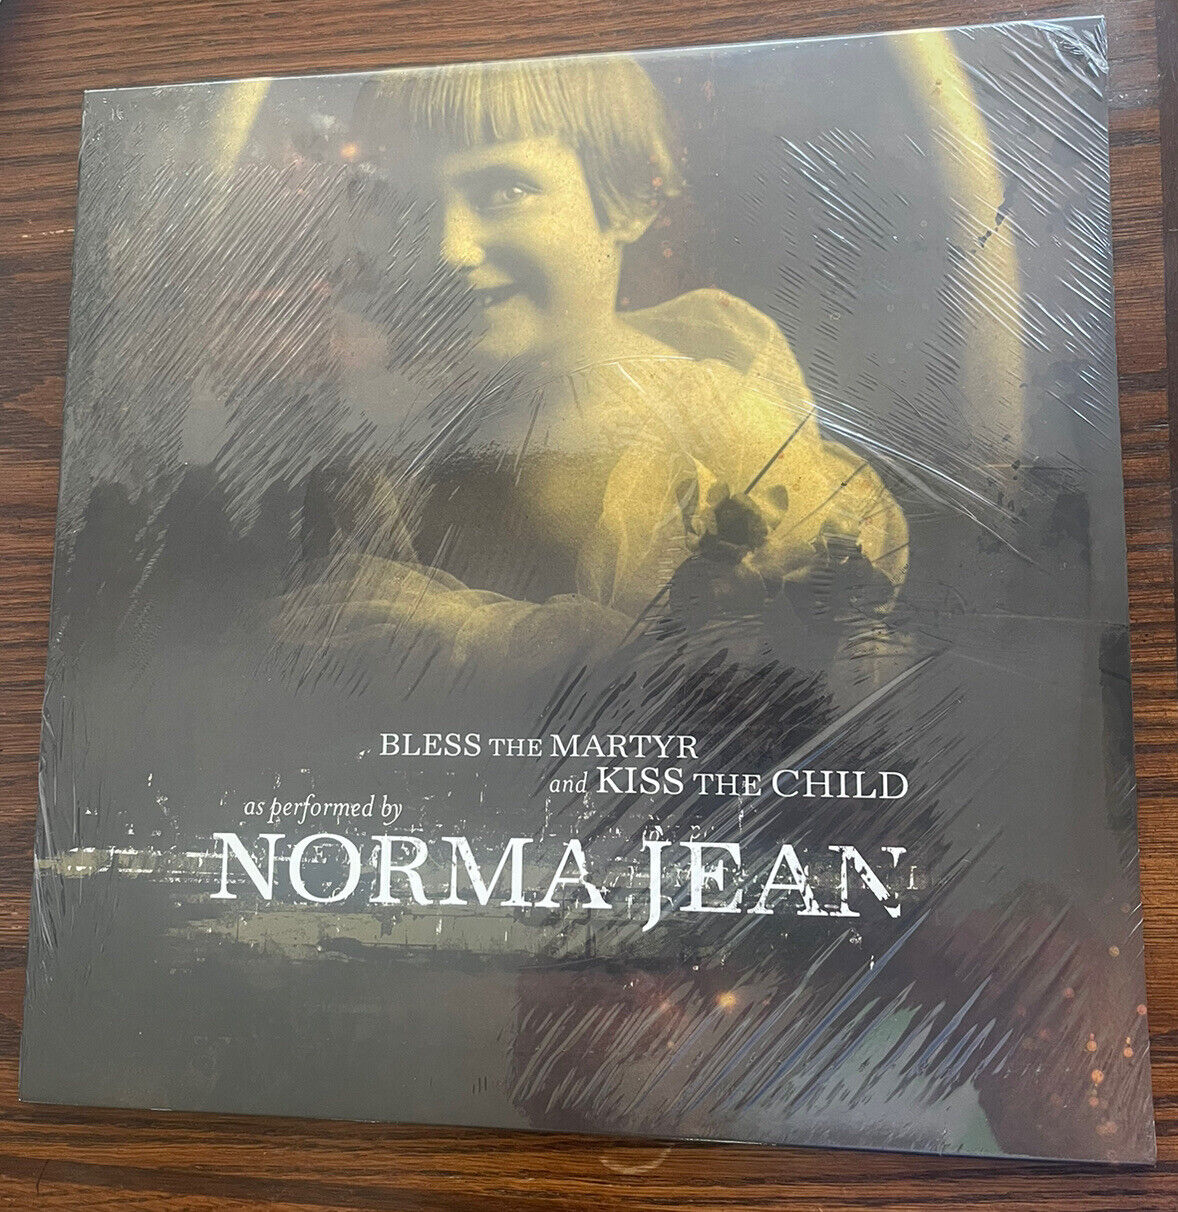 Norma Jean - Bless The Martyr & Kiss The Child Vinyl (Senescent 20th Anniversary